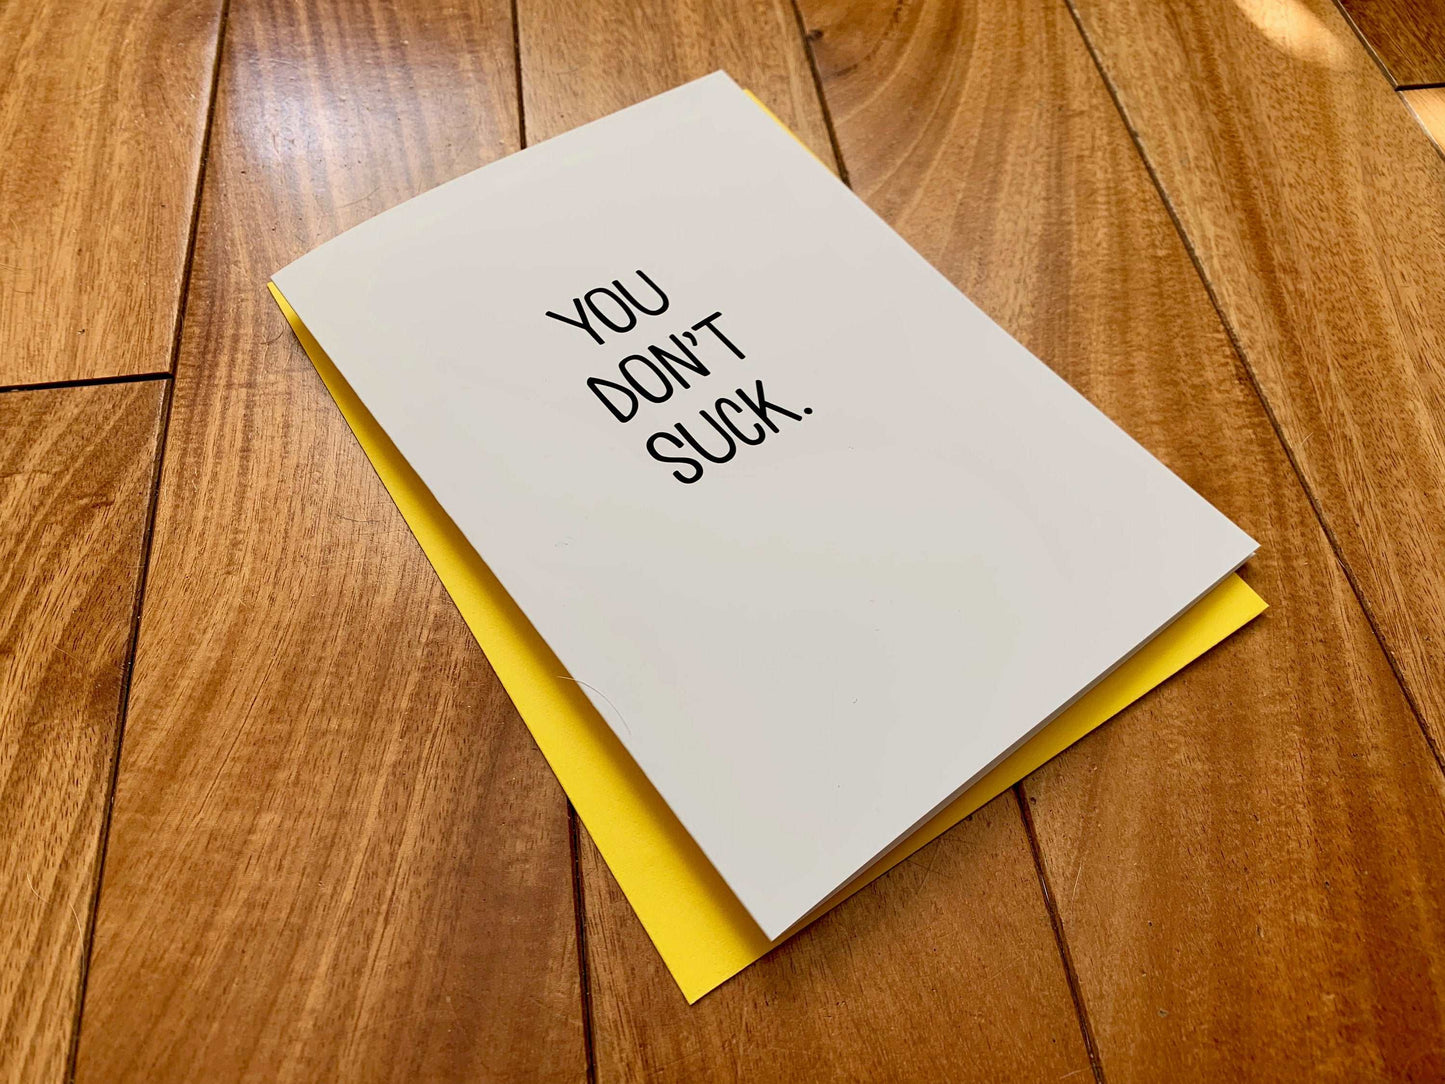 Funny Handmade You Don't Suck Note Card by StoneDonut Design